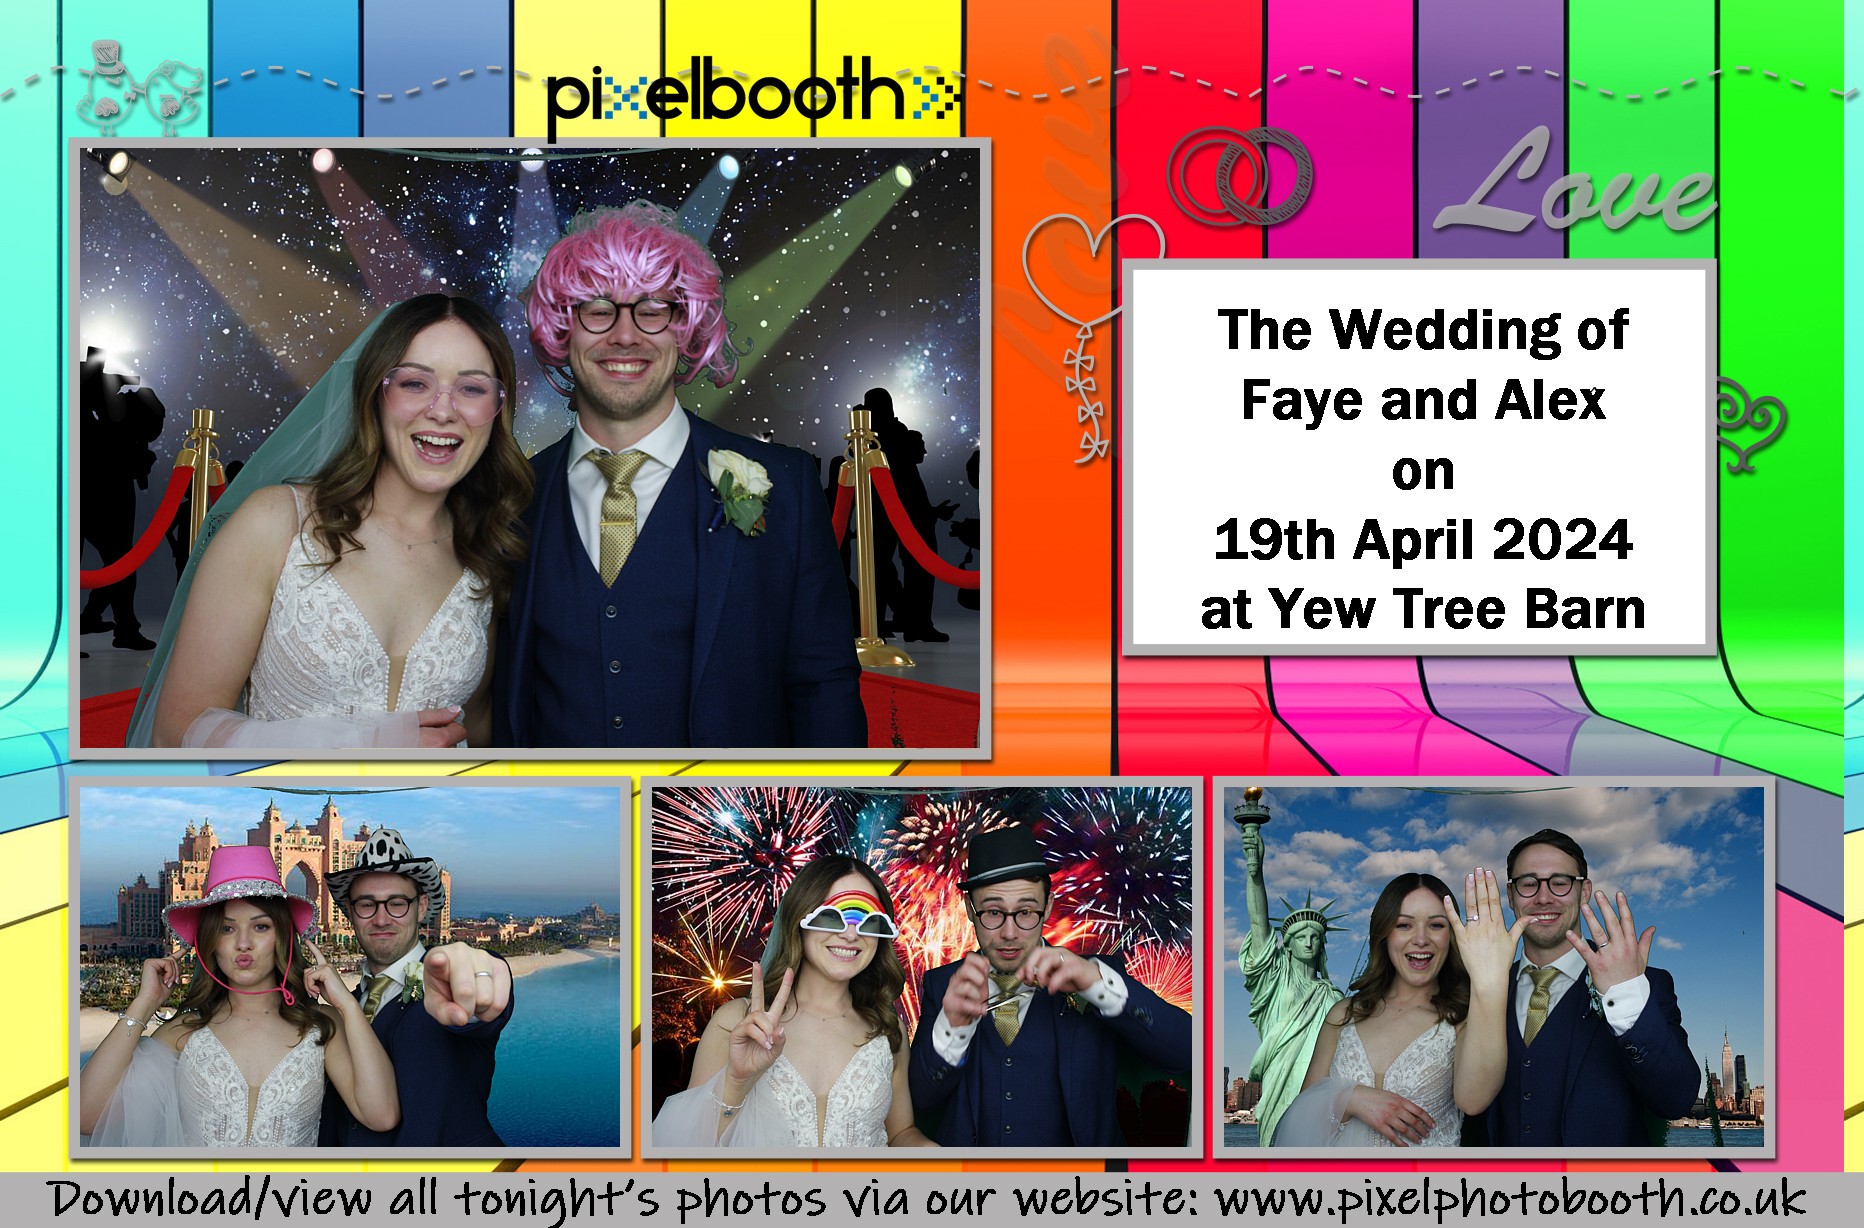 19th April 2024: Faye and Alex's Wedding at Yew Tree Barn